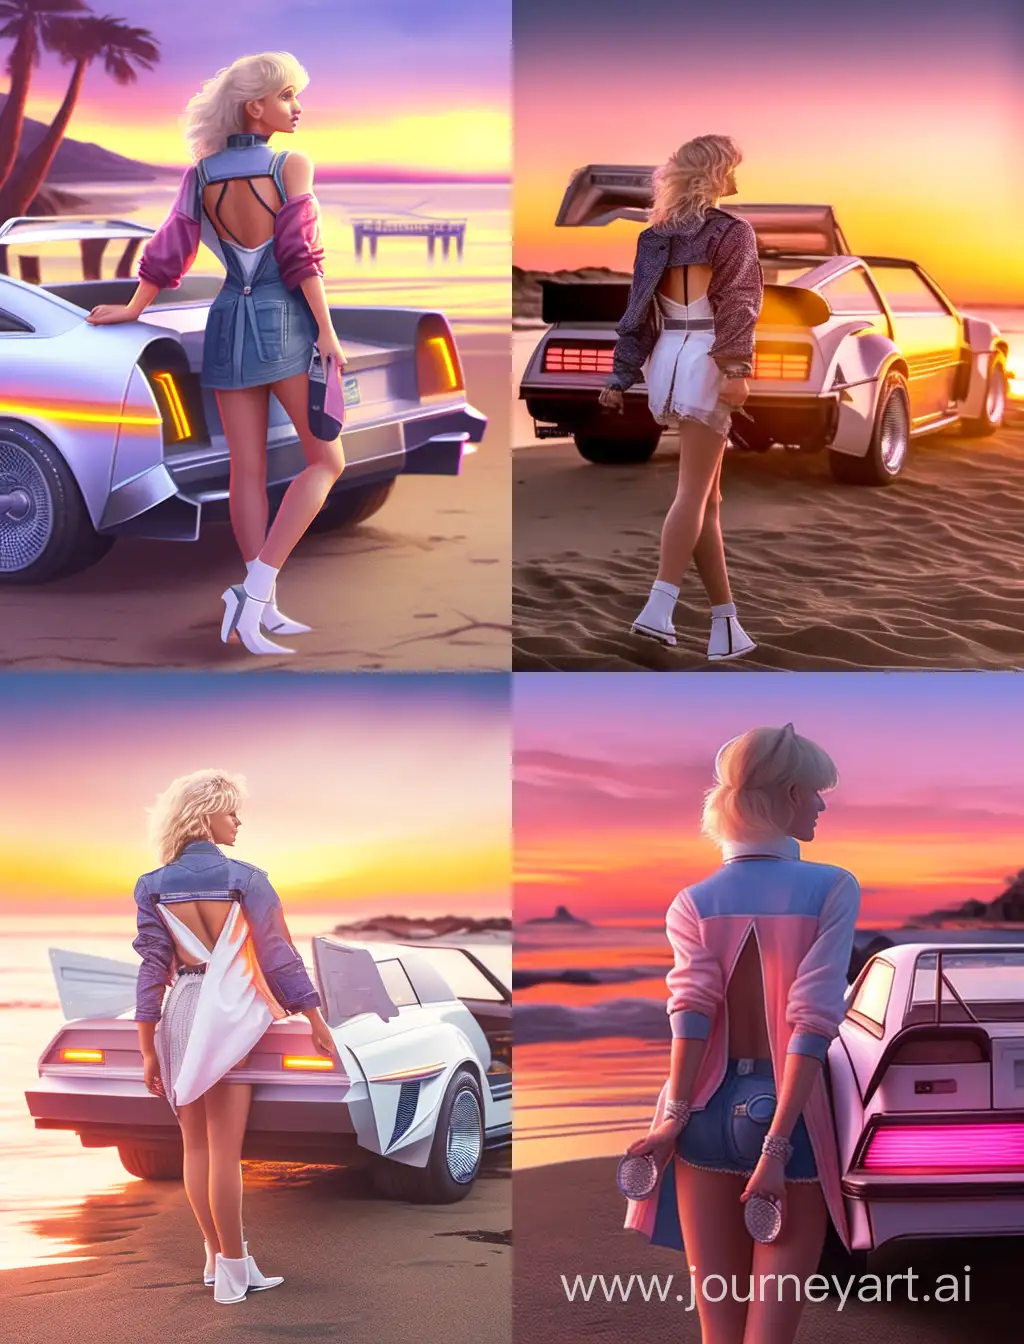 Blonde-Brittany-Snow-Bikini-Sunset-Pose-with-Back-to-the-Future-Delorean-on-Beach